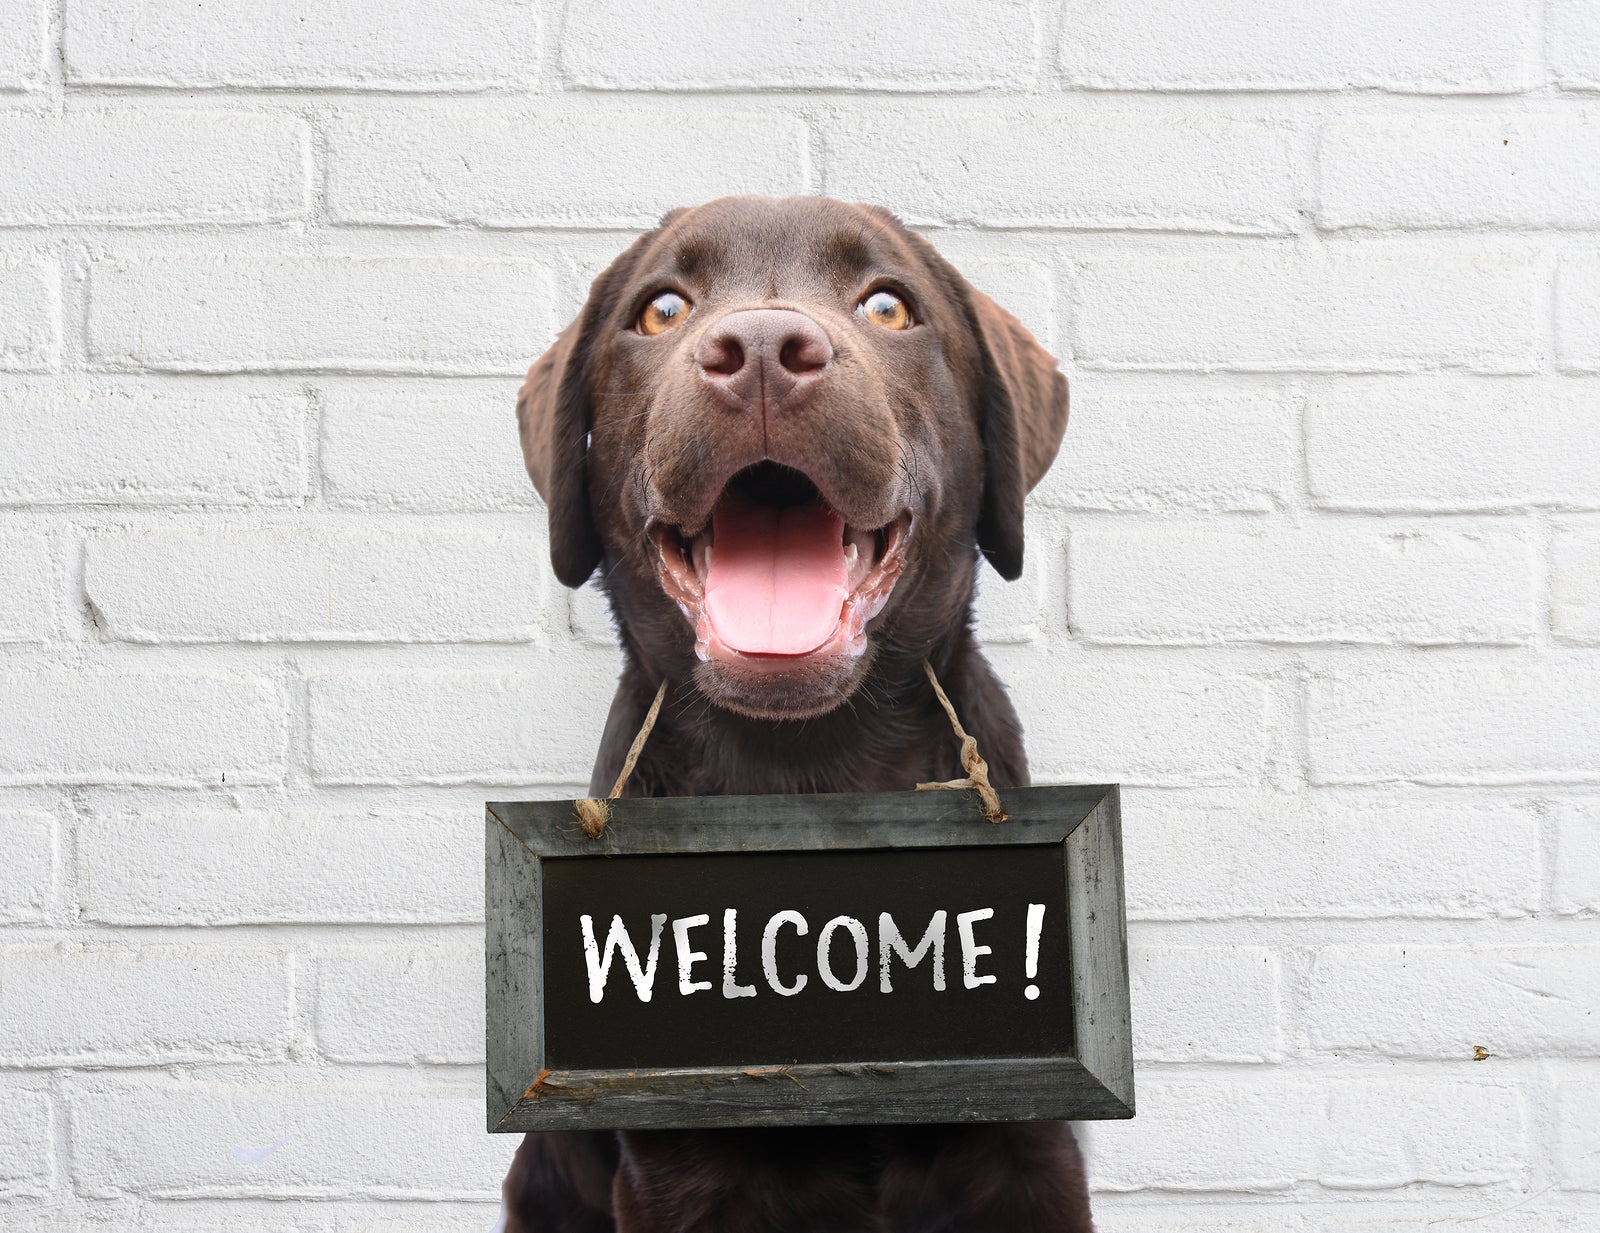 Happy dog with chalkboard with welcome text says hello welcome were open against white brick outdoor wall